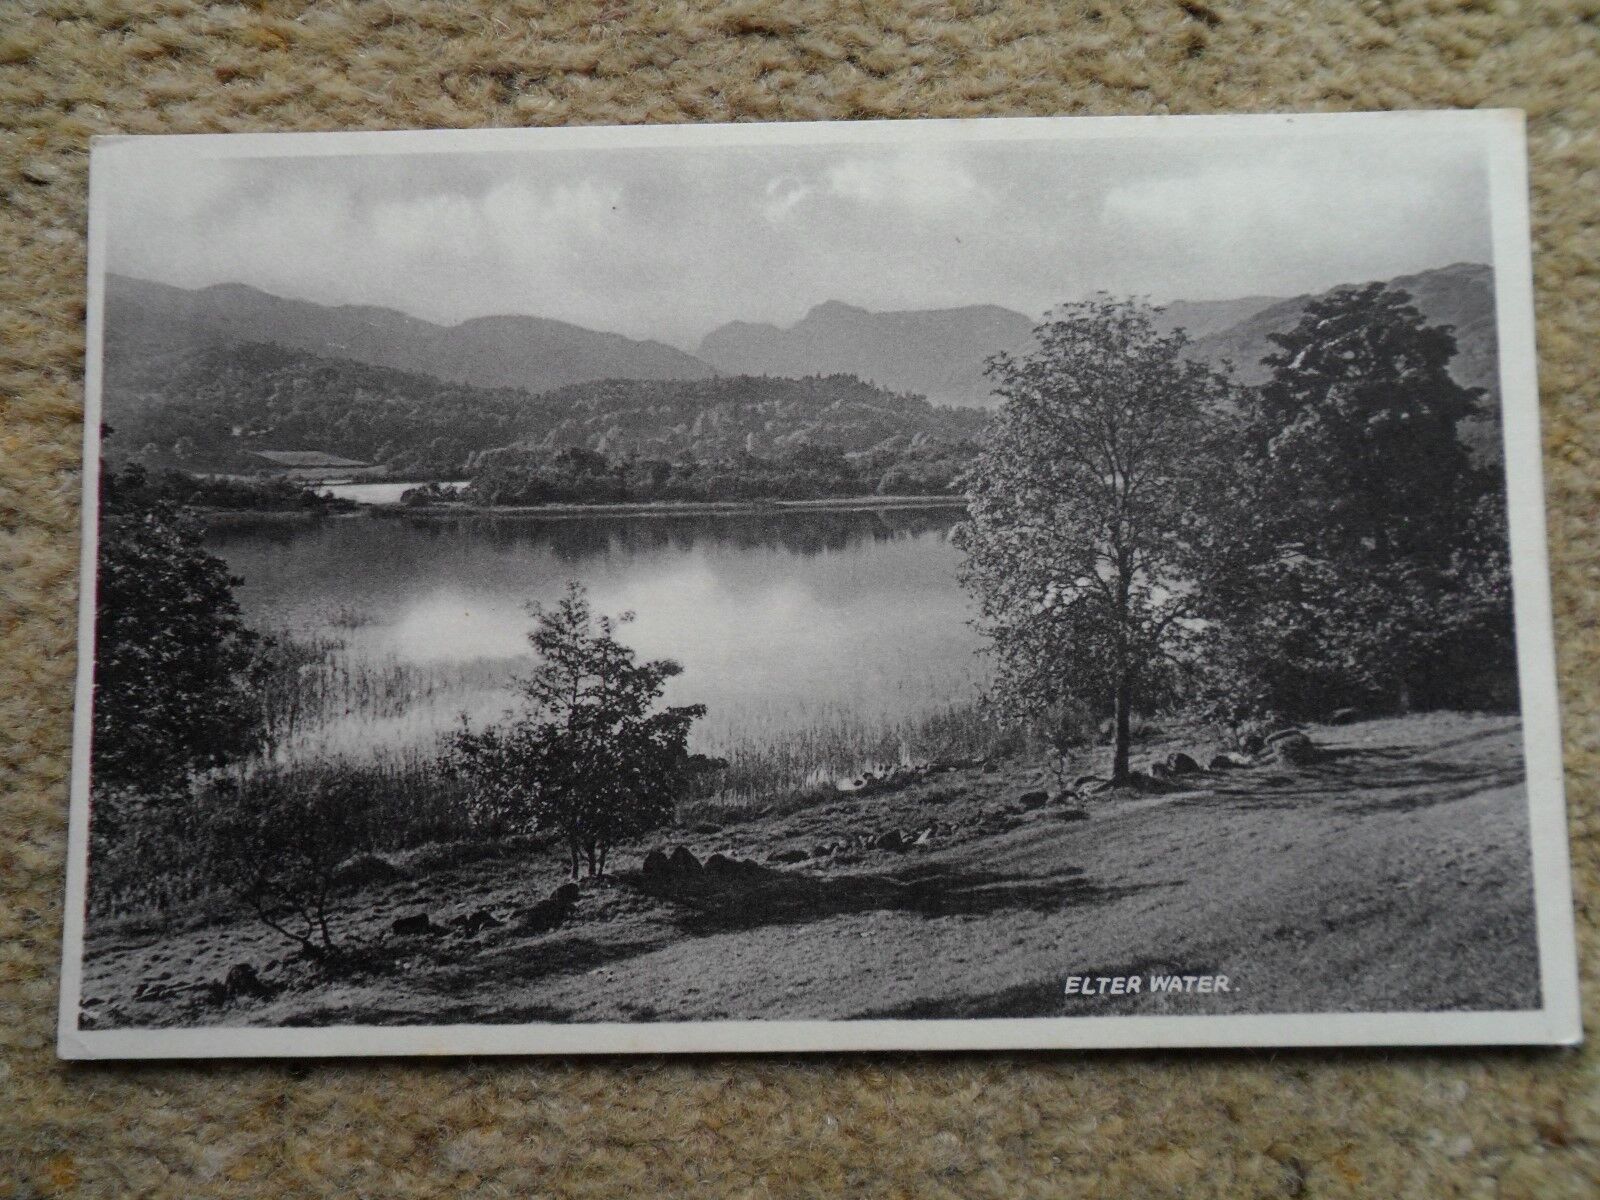 House Clearance - .MAYSONS' KESWICK SERIES POSTCARD OF ELTER WATER.WRITTEN ON NOT POSTED.